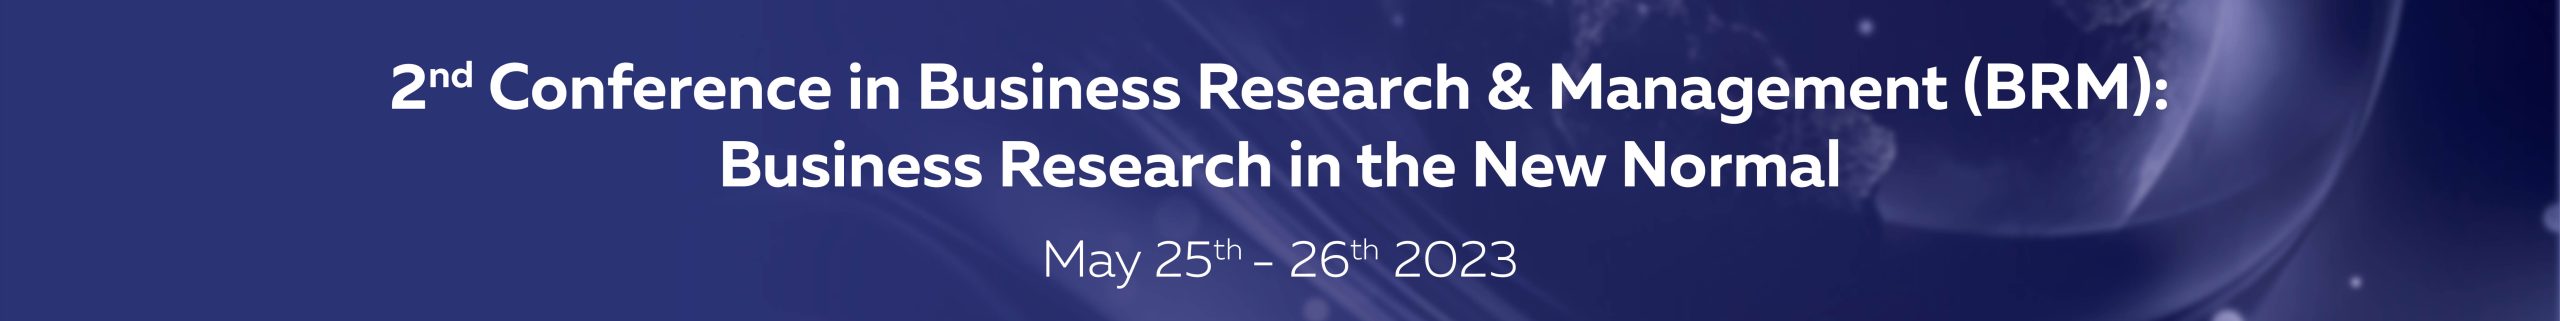 2nd Business Research & Management (BRM) Conference: Business Research in the New Normal